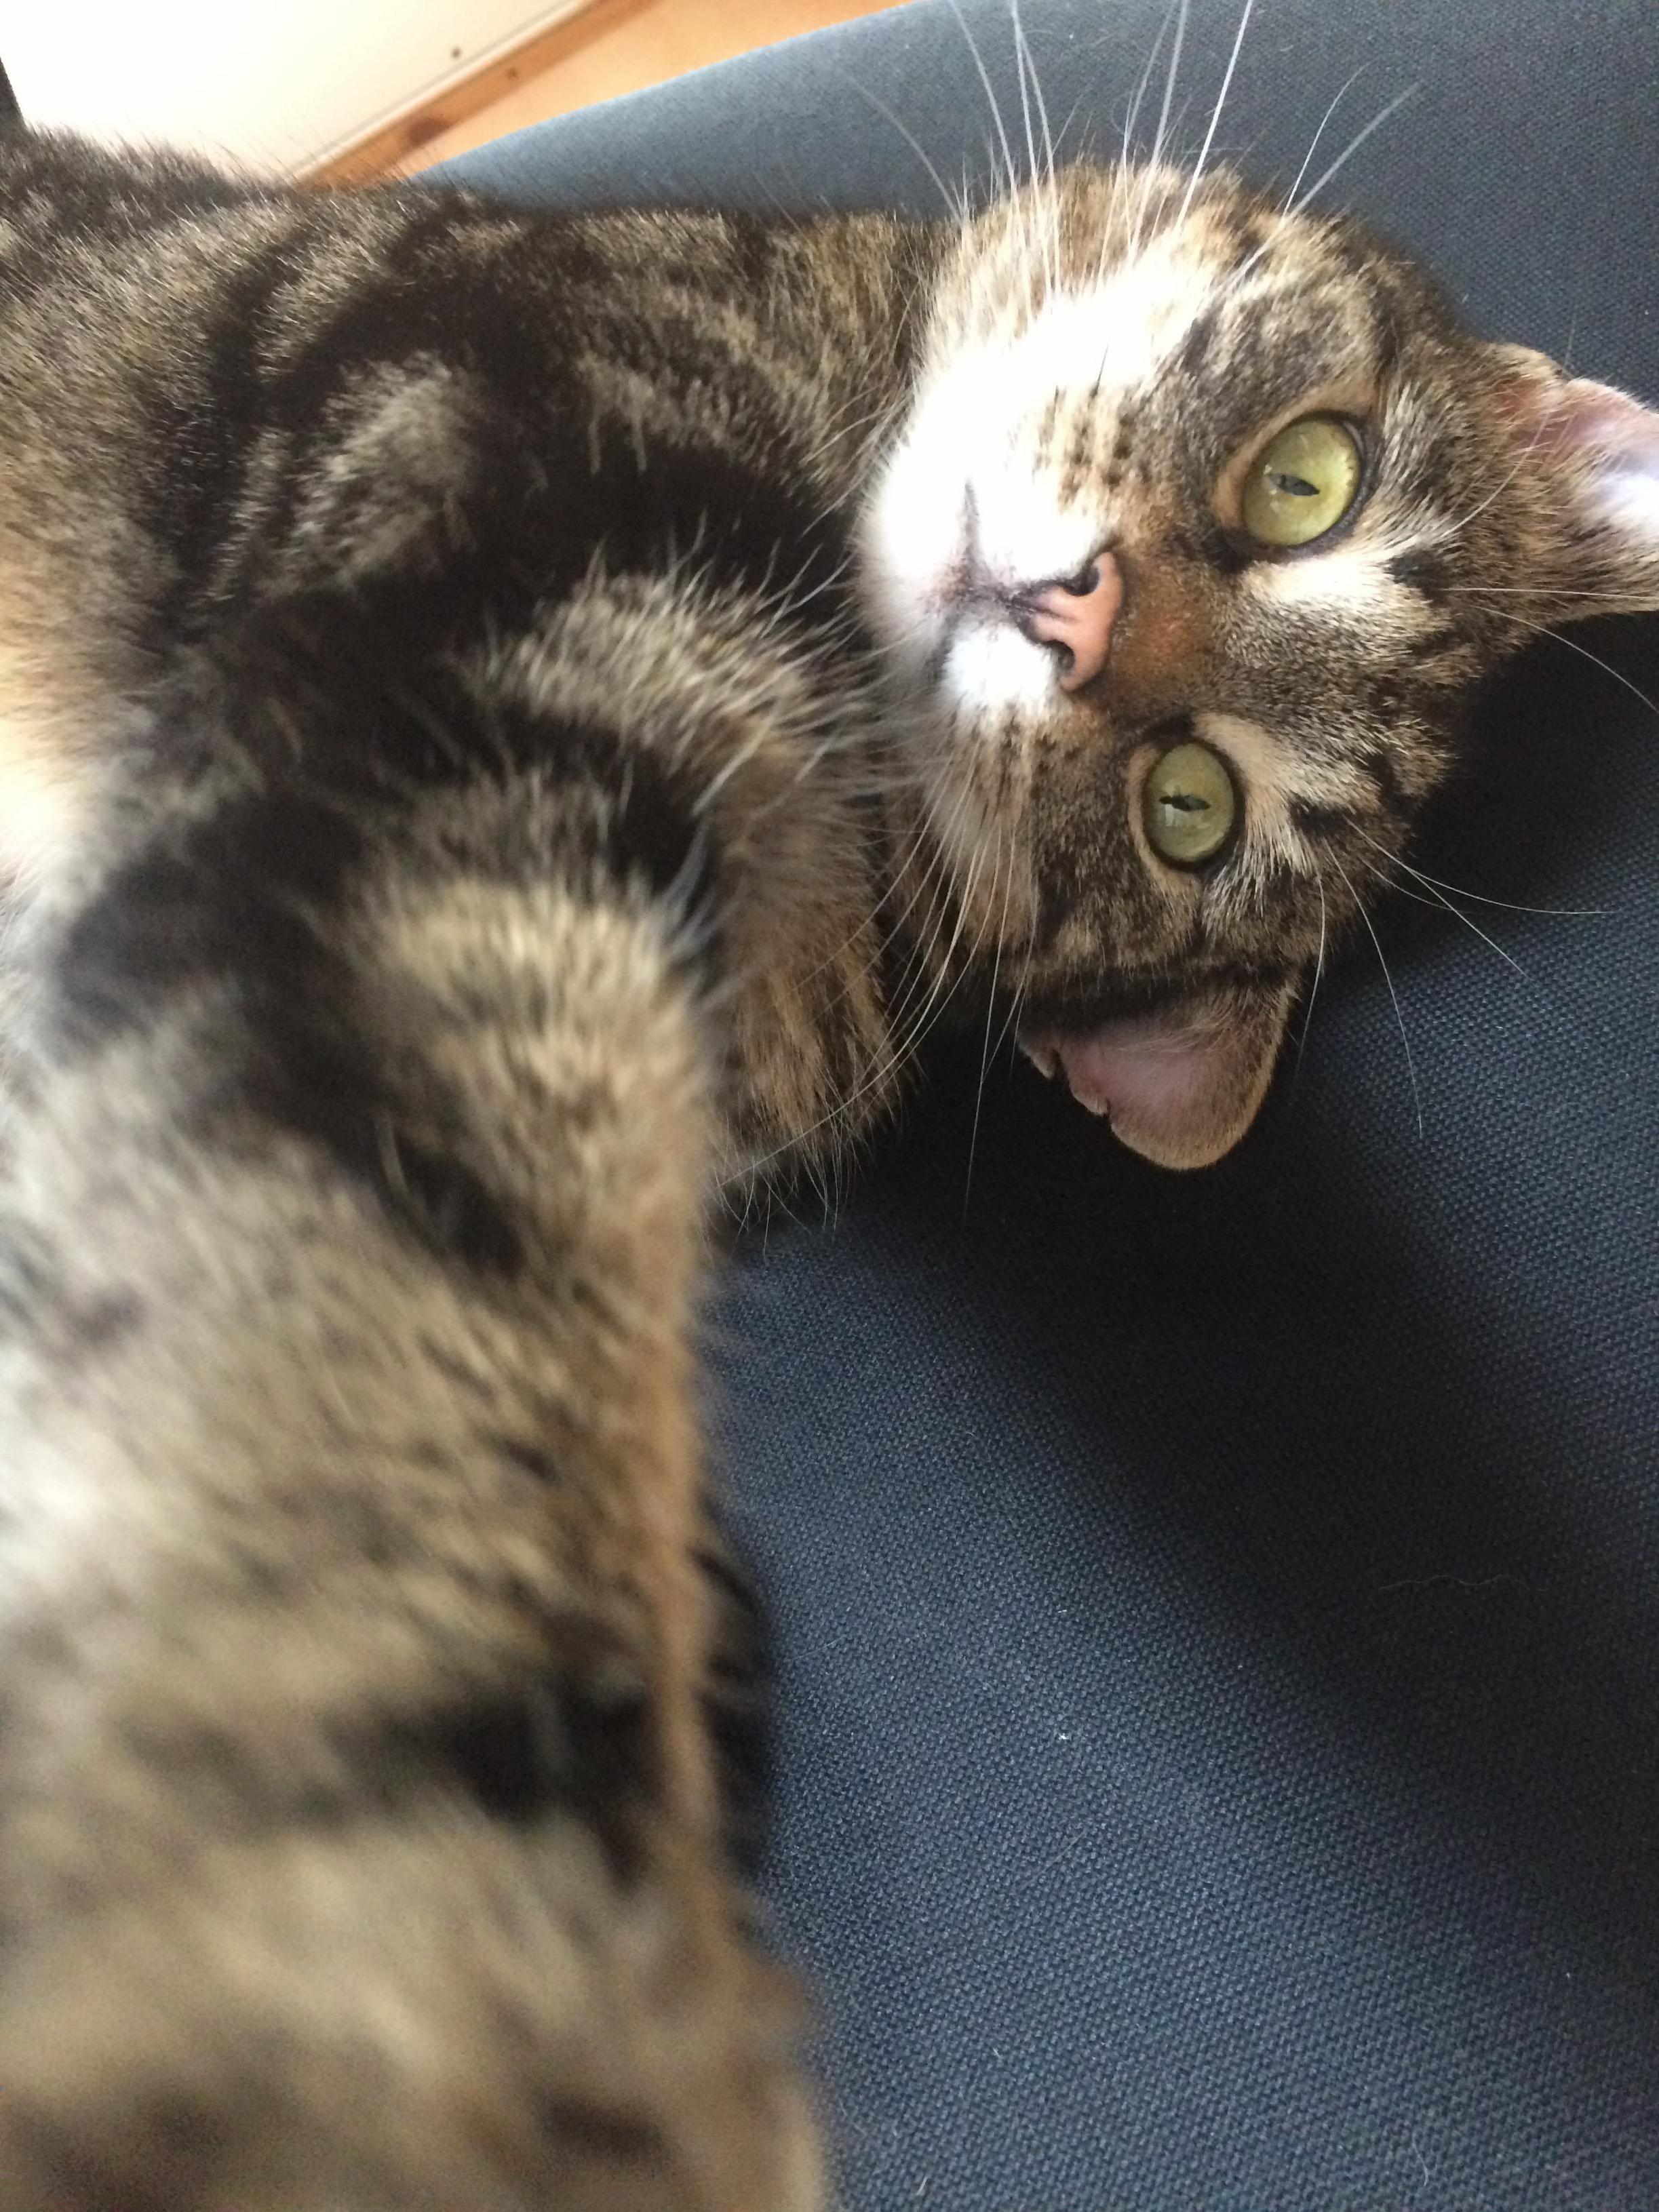 This is my cat taking a selfie.